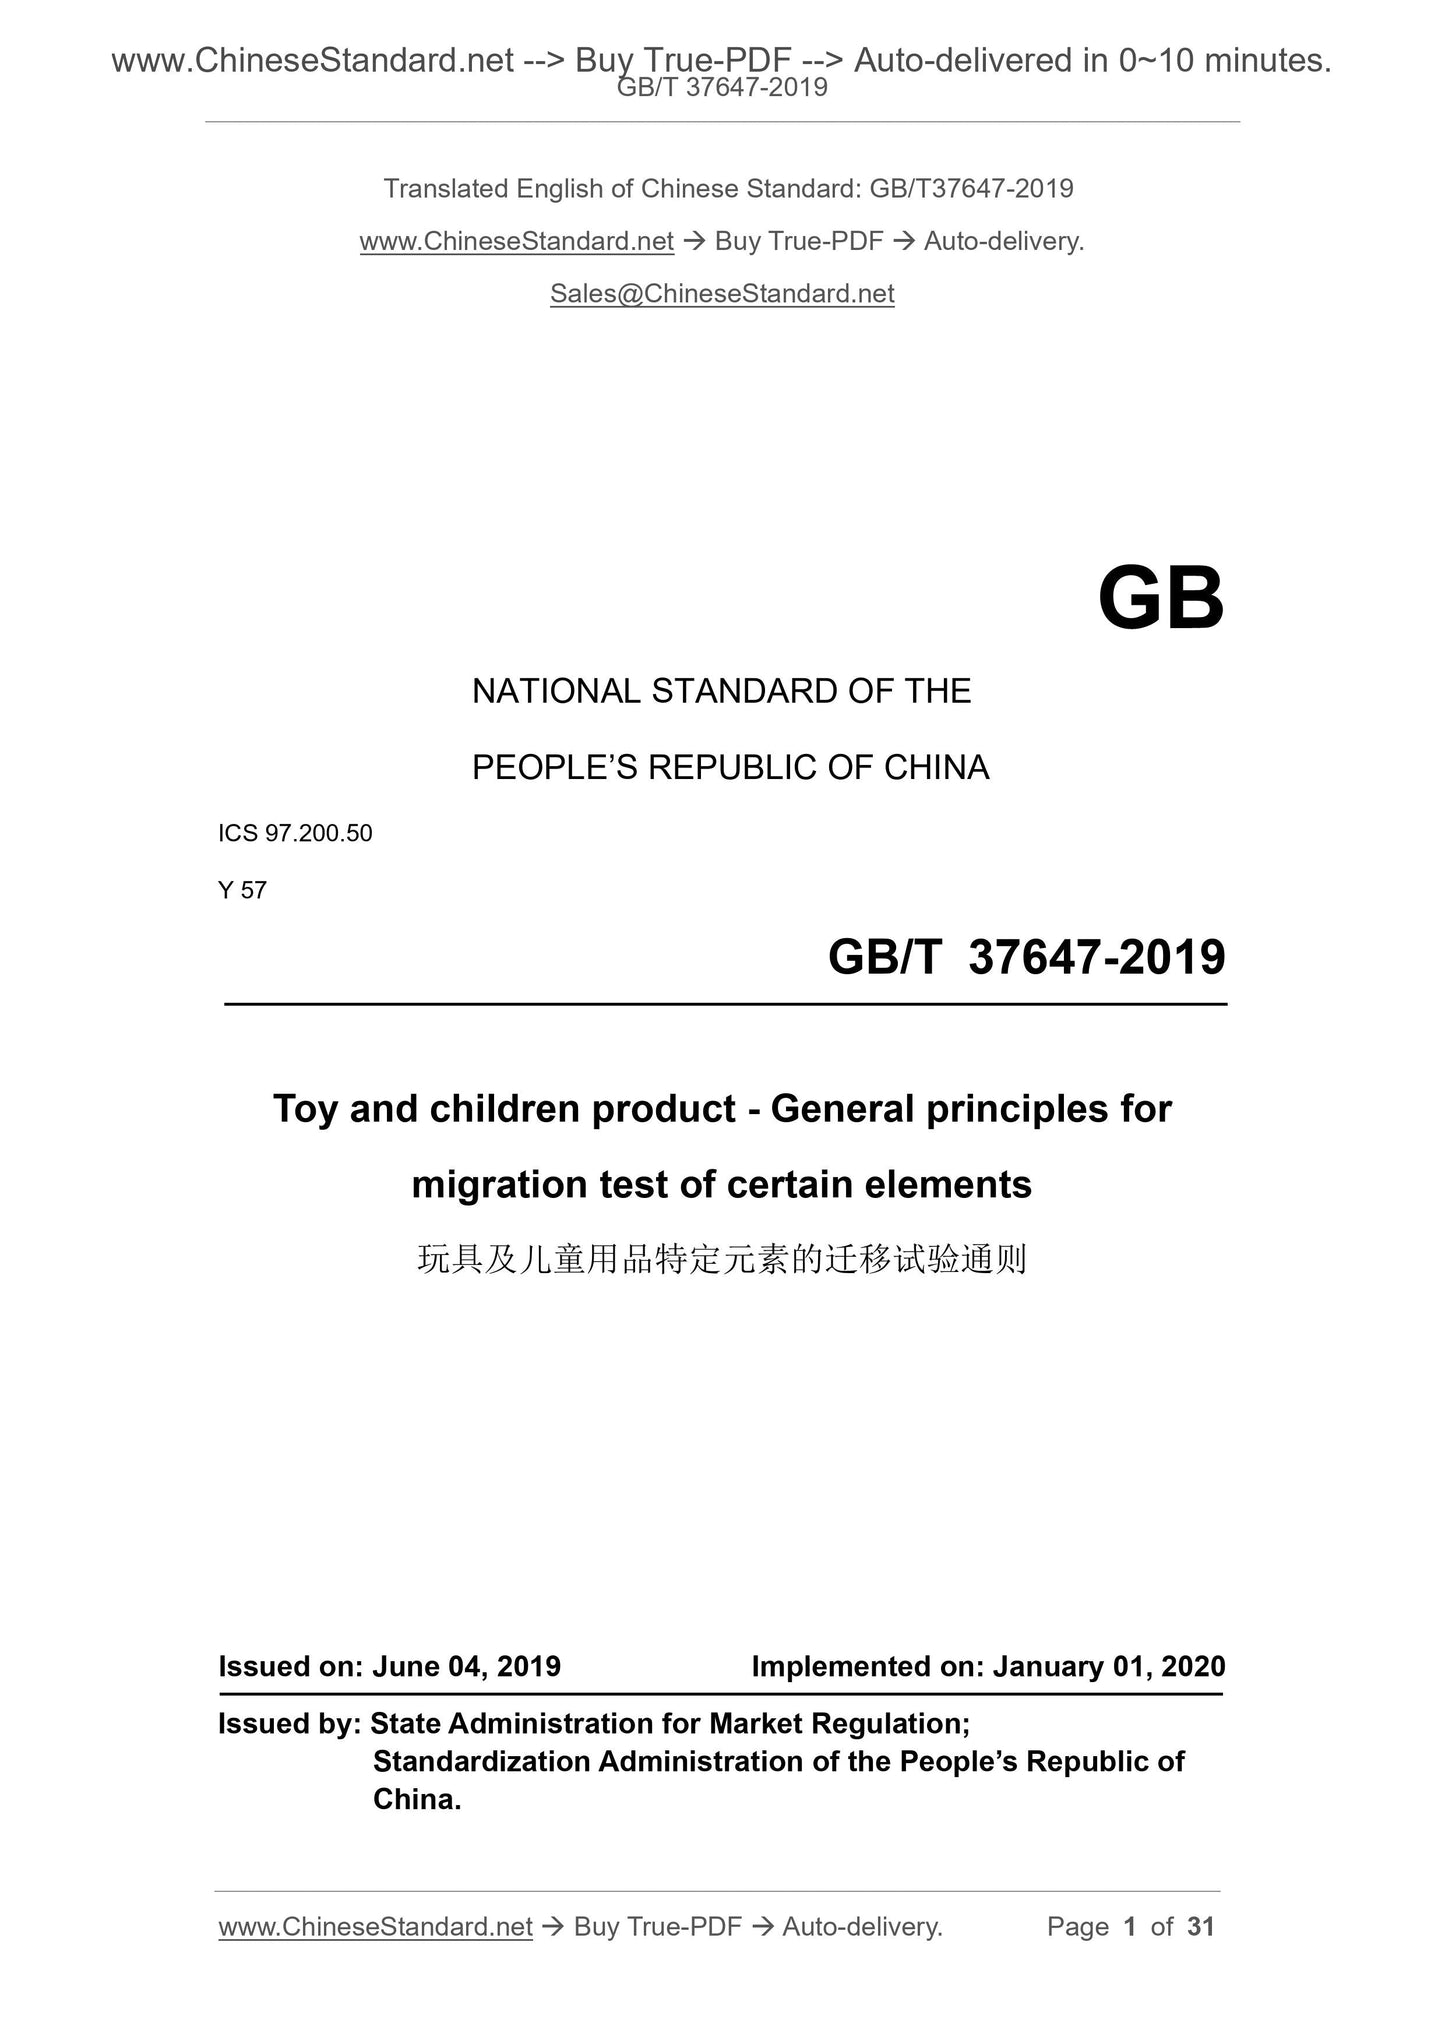 GB/T 37647-2019 Page 1